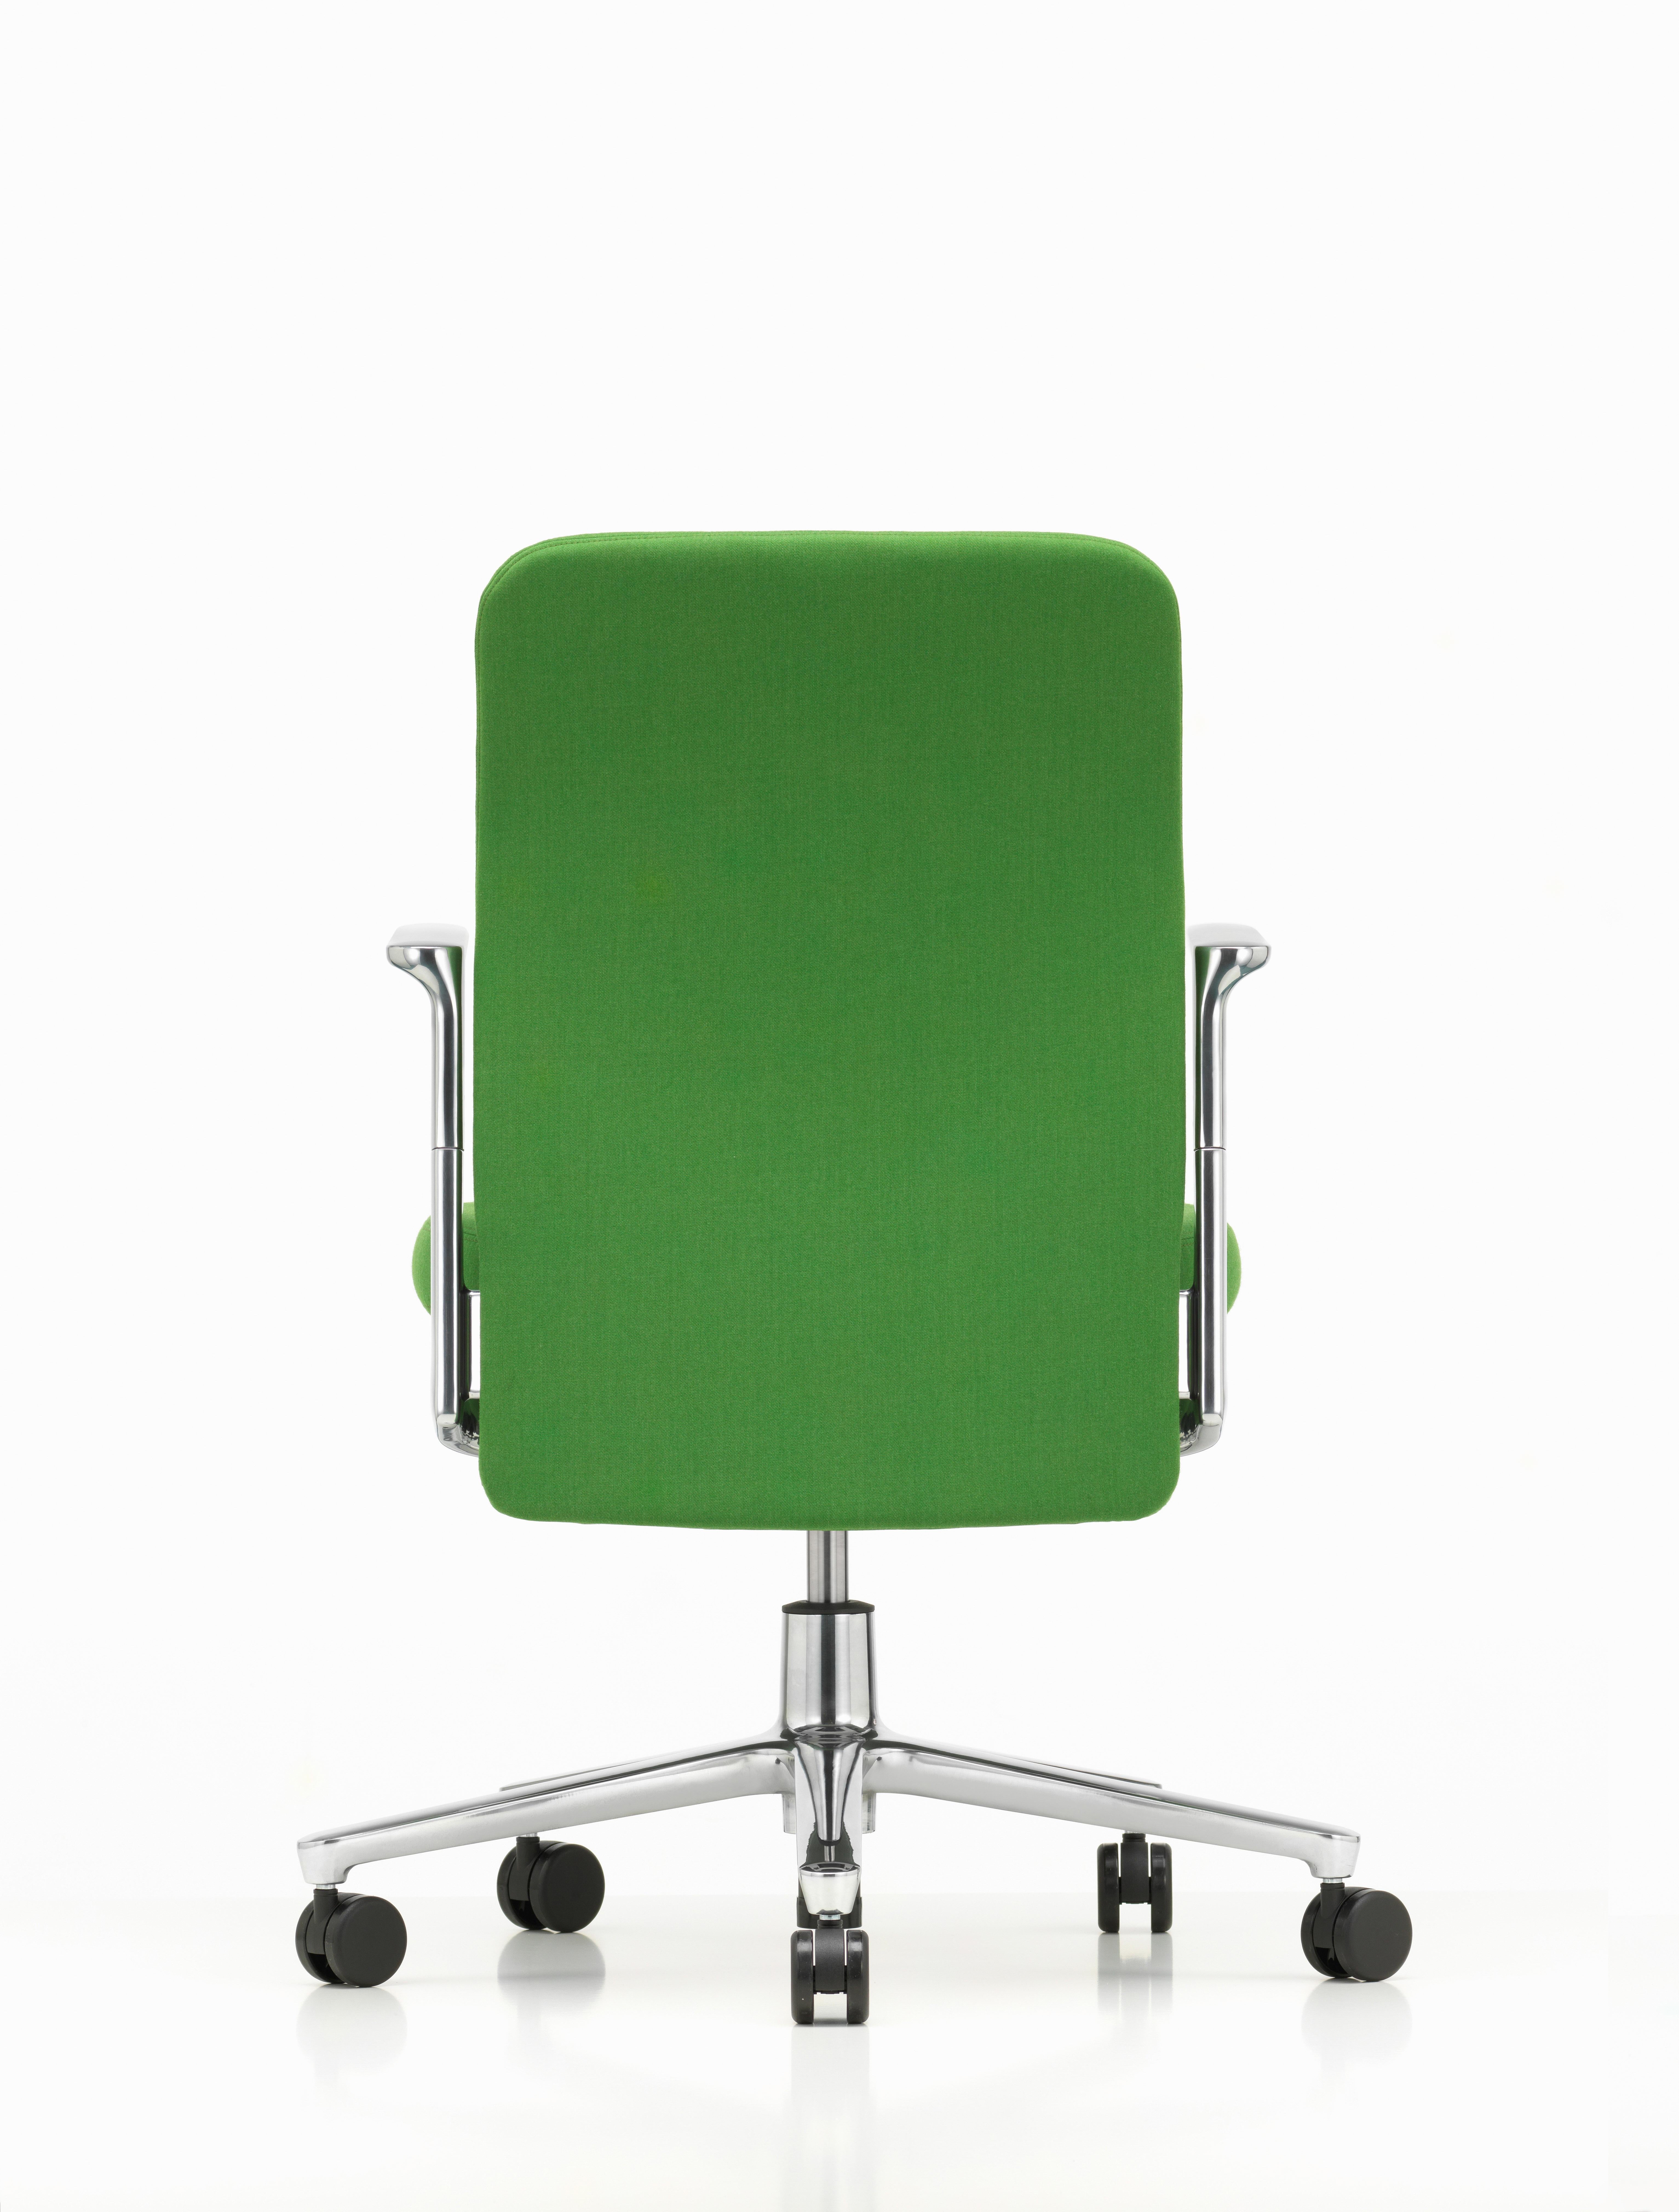 When equipped with a high backrest and adjustable neck cushion, the Pacific chair offers additional support in the upper spine. Its understated design has a distinguished aura and is therefore perfectly adapted to office environments with a